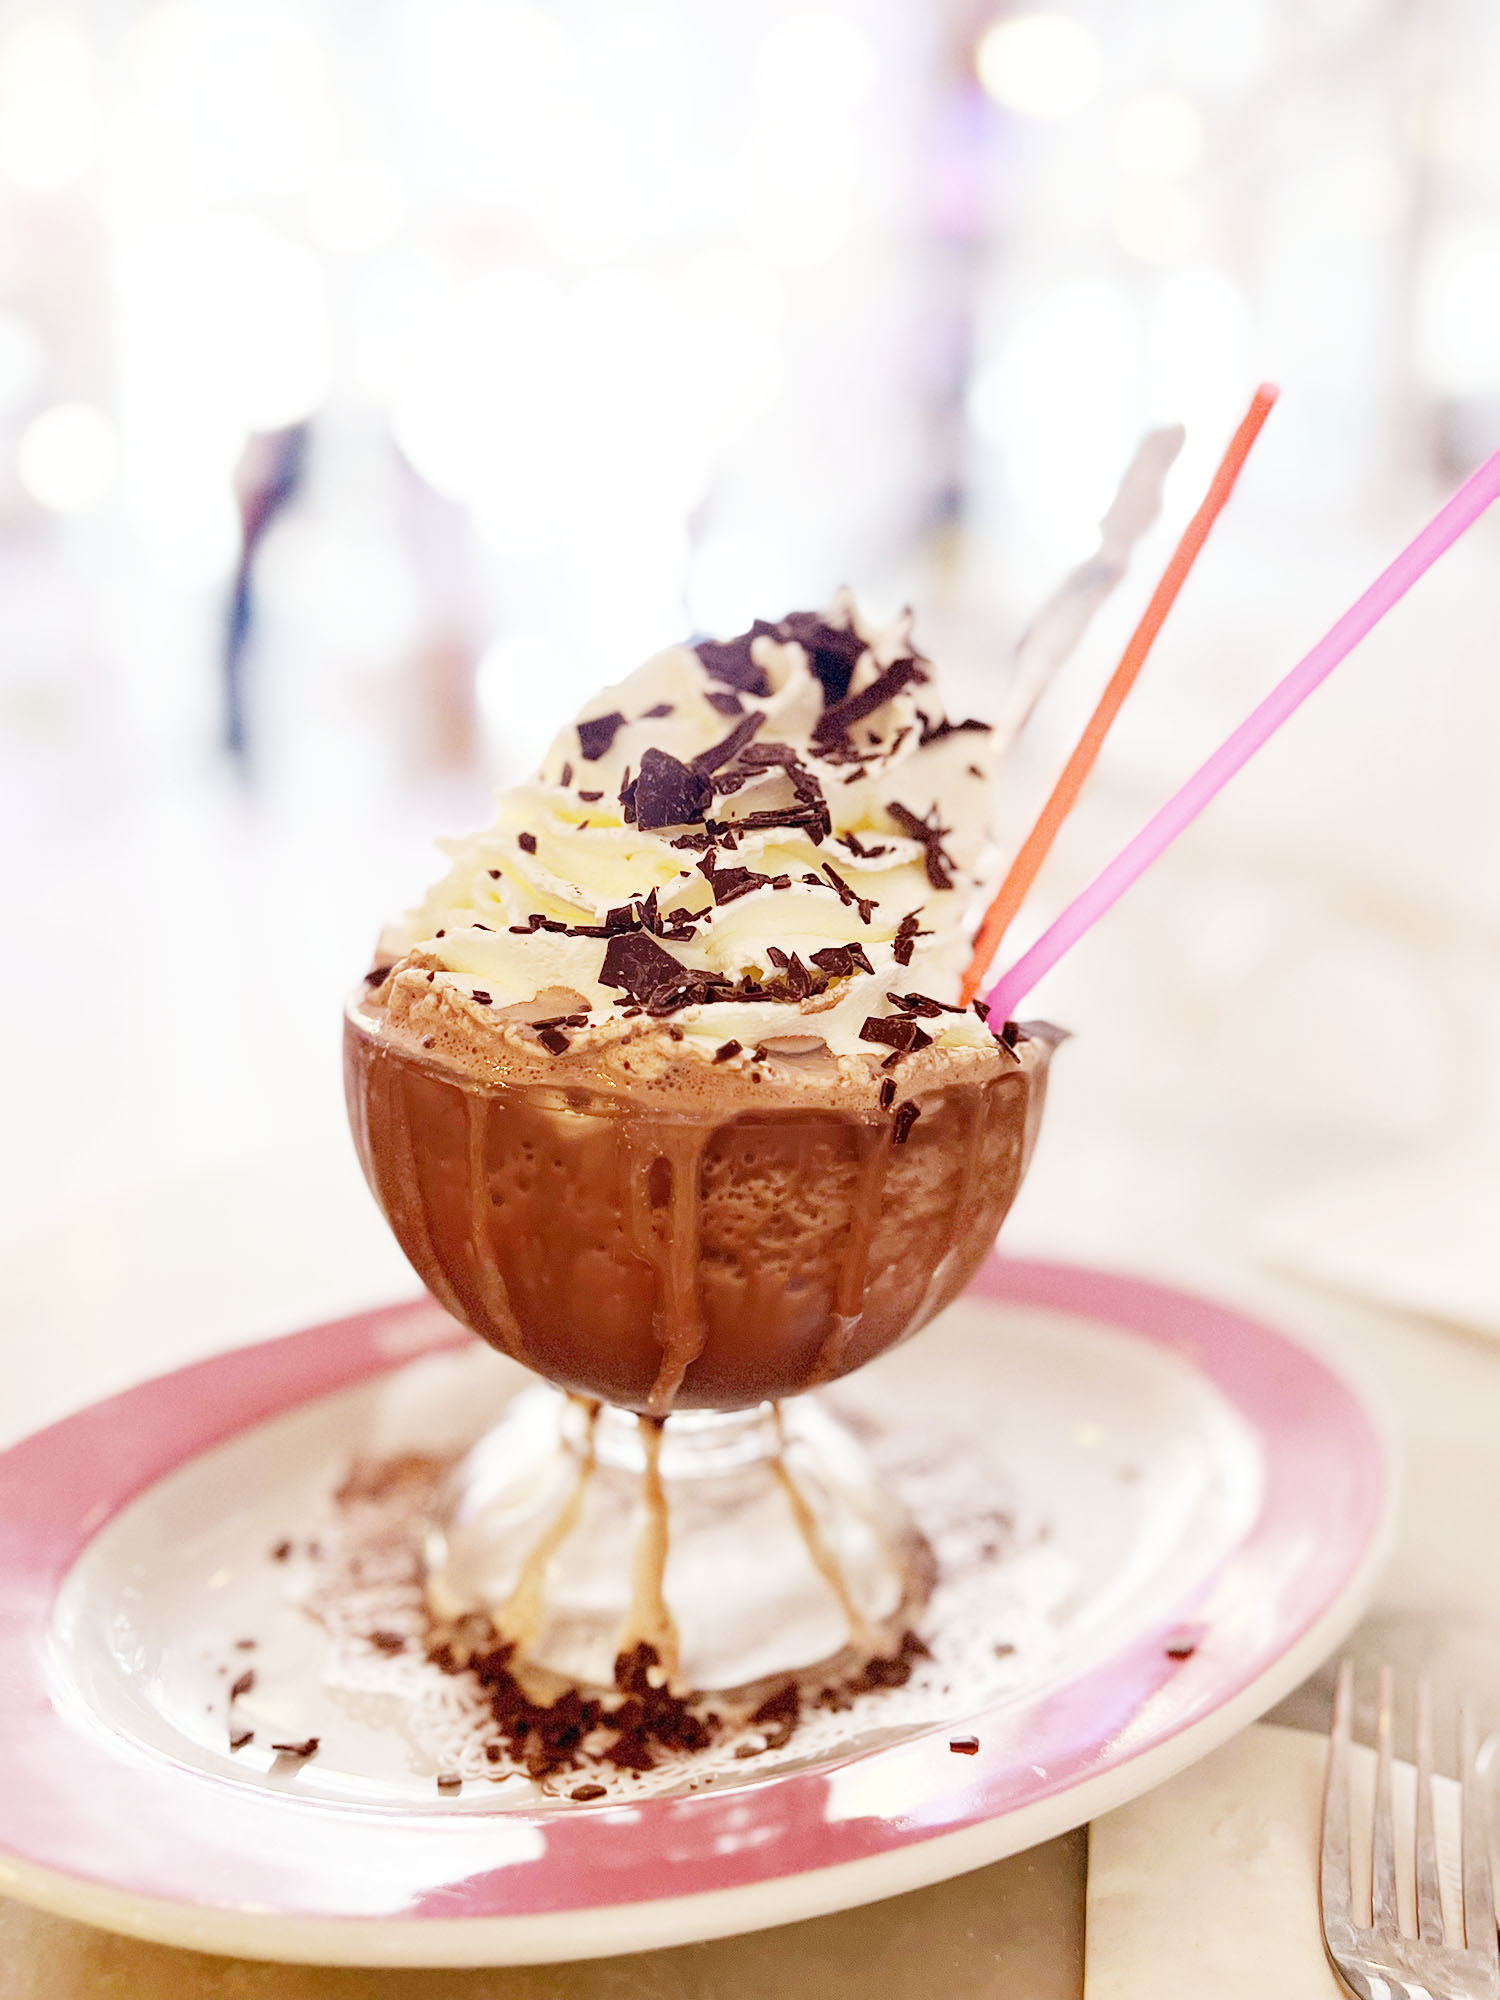 NYC: Serendipity 3 and the Frrrozen Hot Chocolate